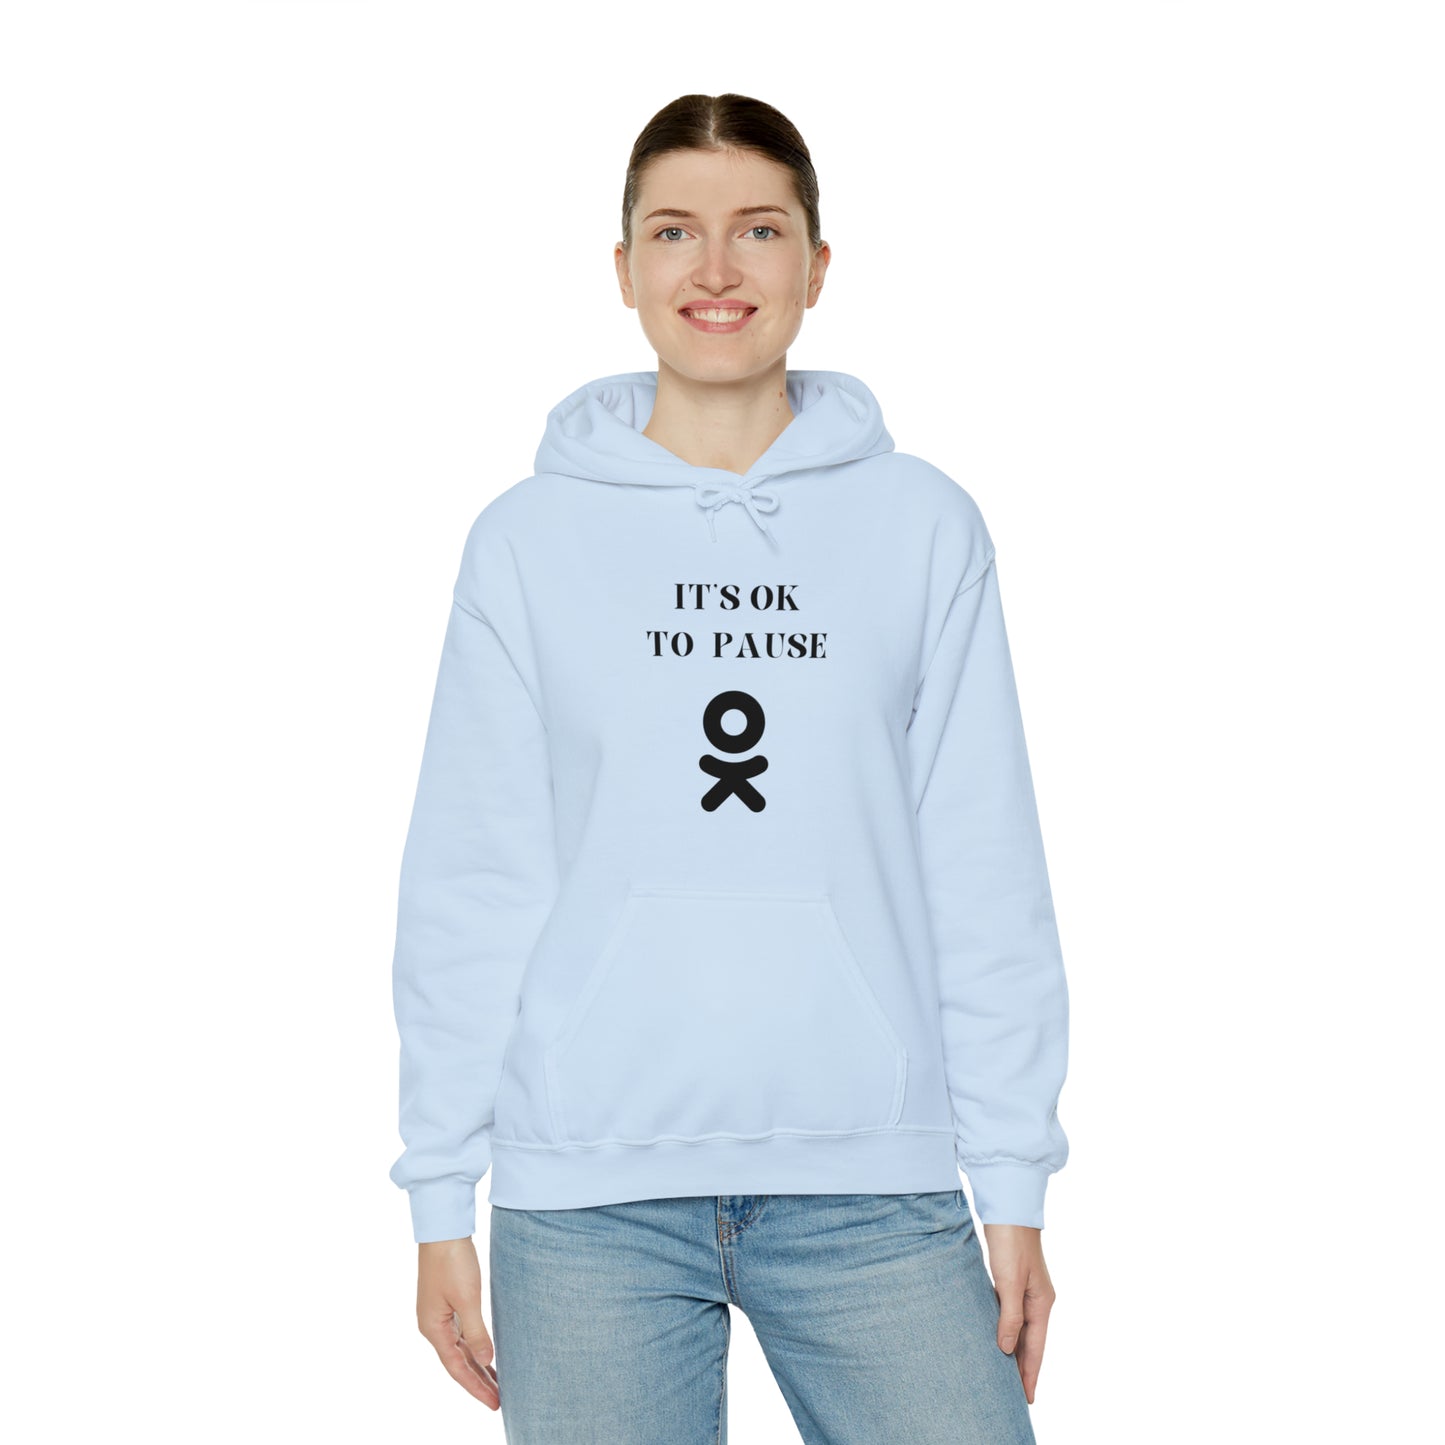 It's ok to pause hooded sweatshirt gift  inspirational words  hoodie gift to encourage. sweatshirt gifts for friends